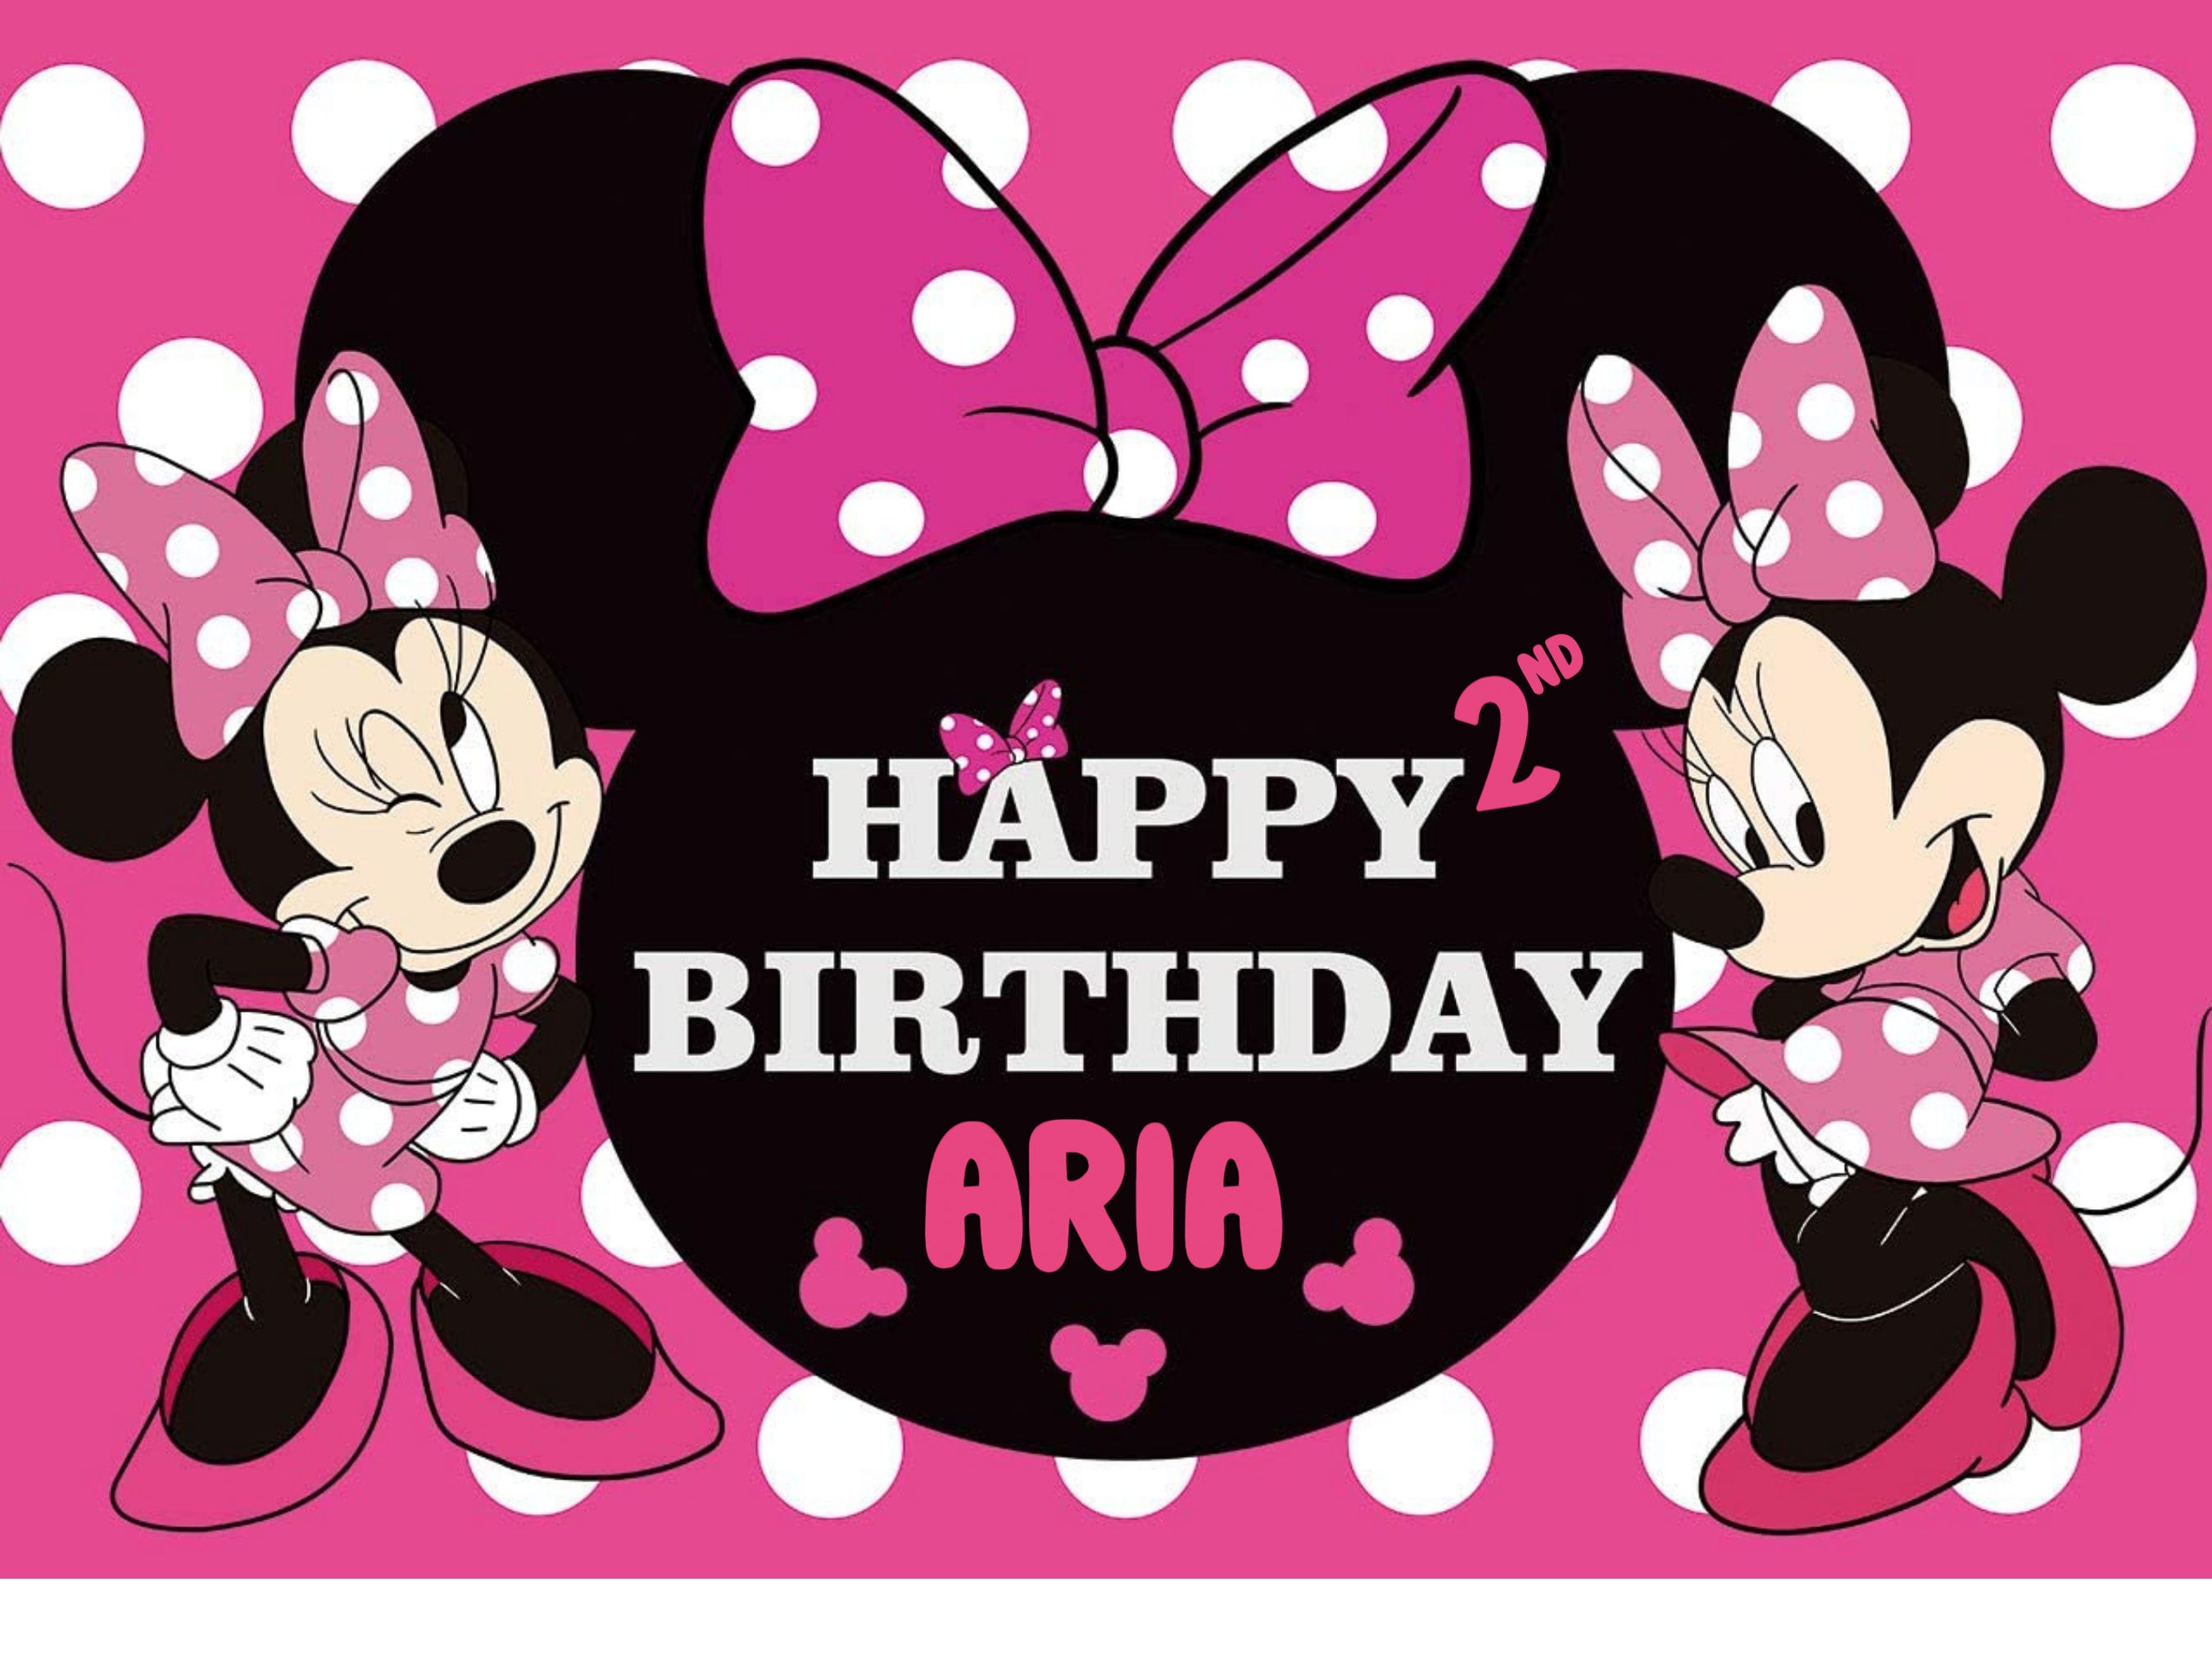 Minnie Mouse Saying Happy Birthday